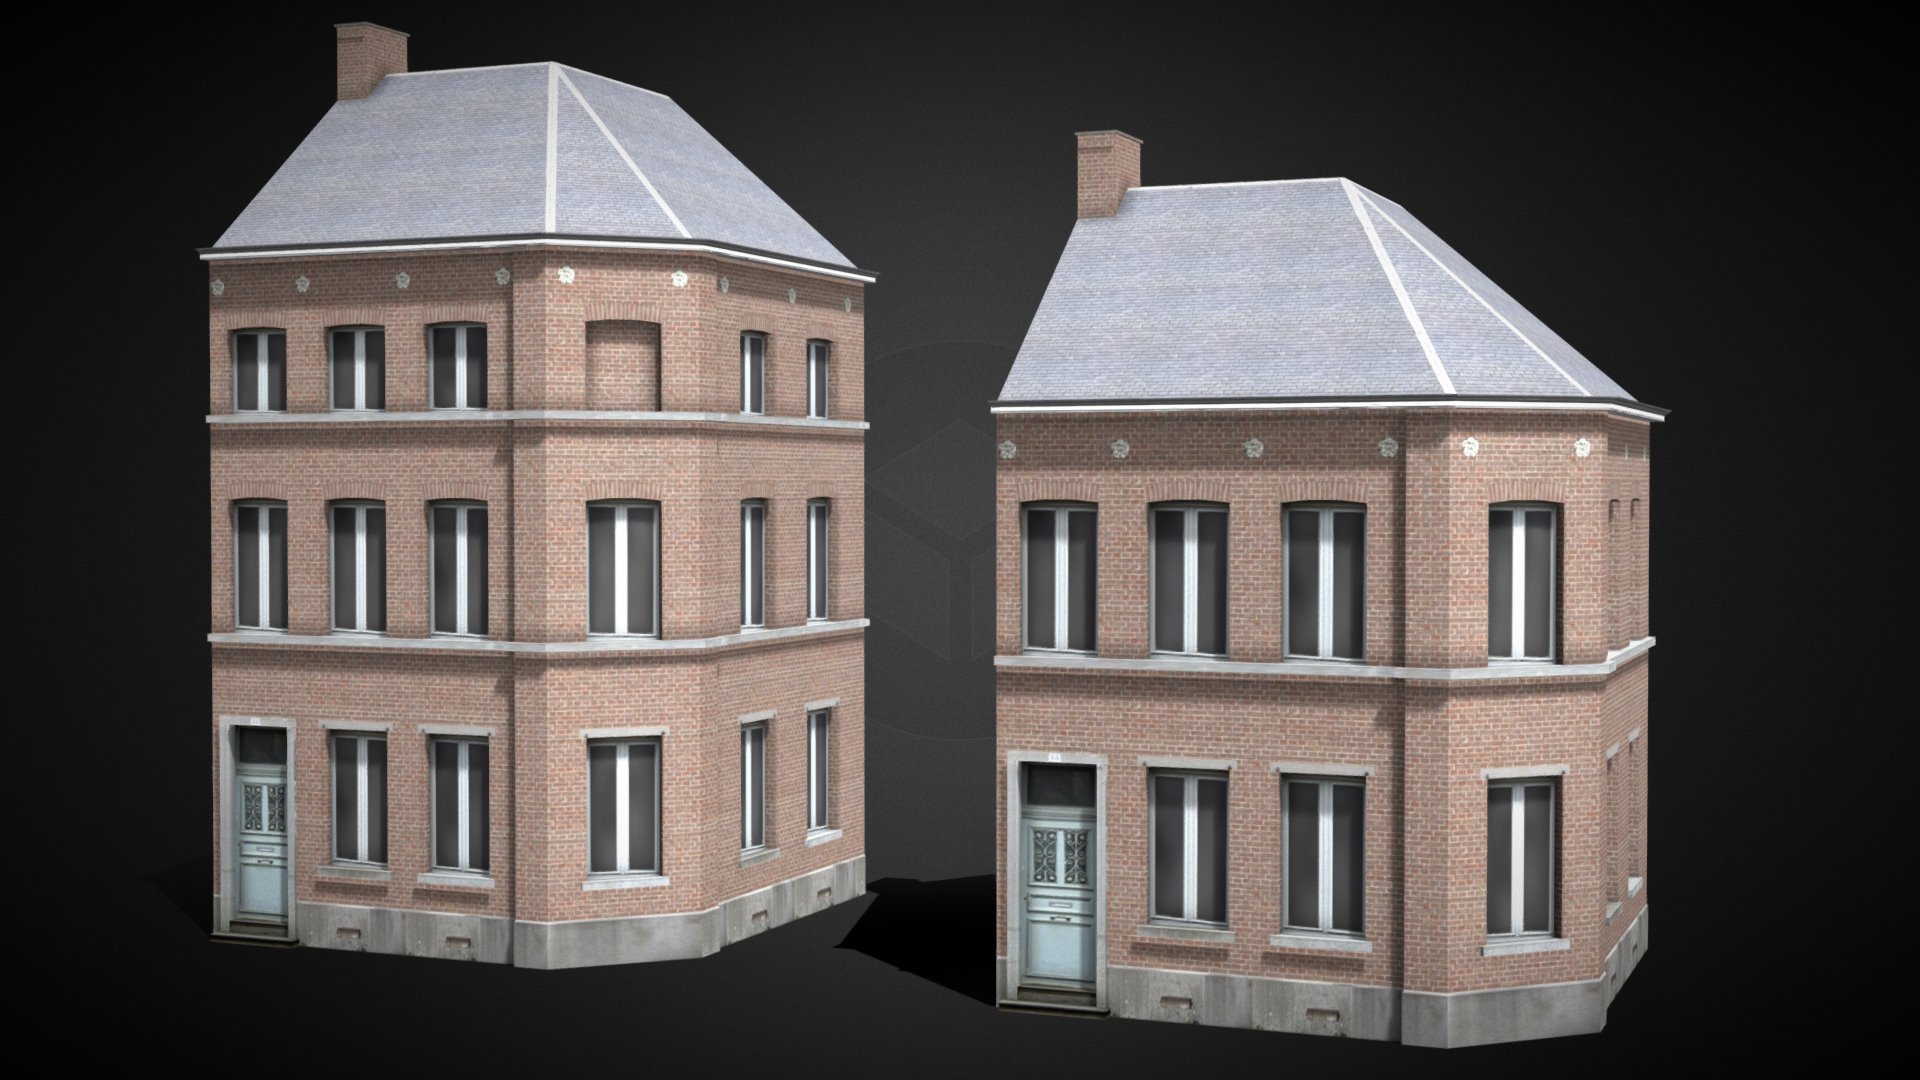 Custom low-poly asset made with Blender and Gimp for the Cities: Skylines video game. Available on the Steam Workshop here: https://steamcommunity.com/sharedfiles/filedetails/?id=1300326389 - Nivelles Corner House 1 [Belgium] - Download Free 3D model by Lost Gecko (@Lost_Gecko) 3d model